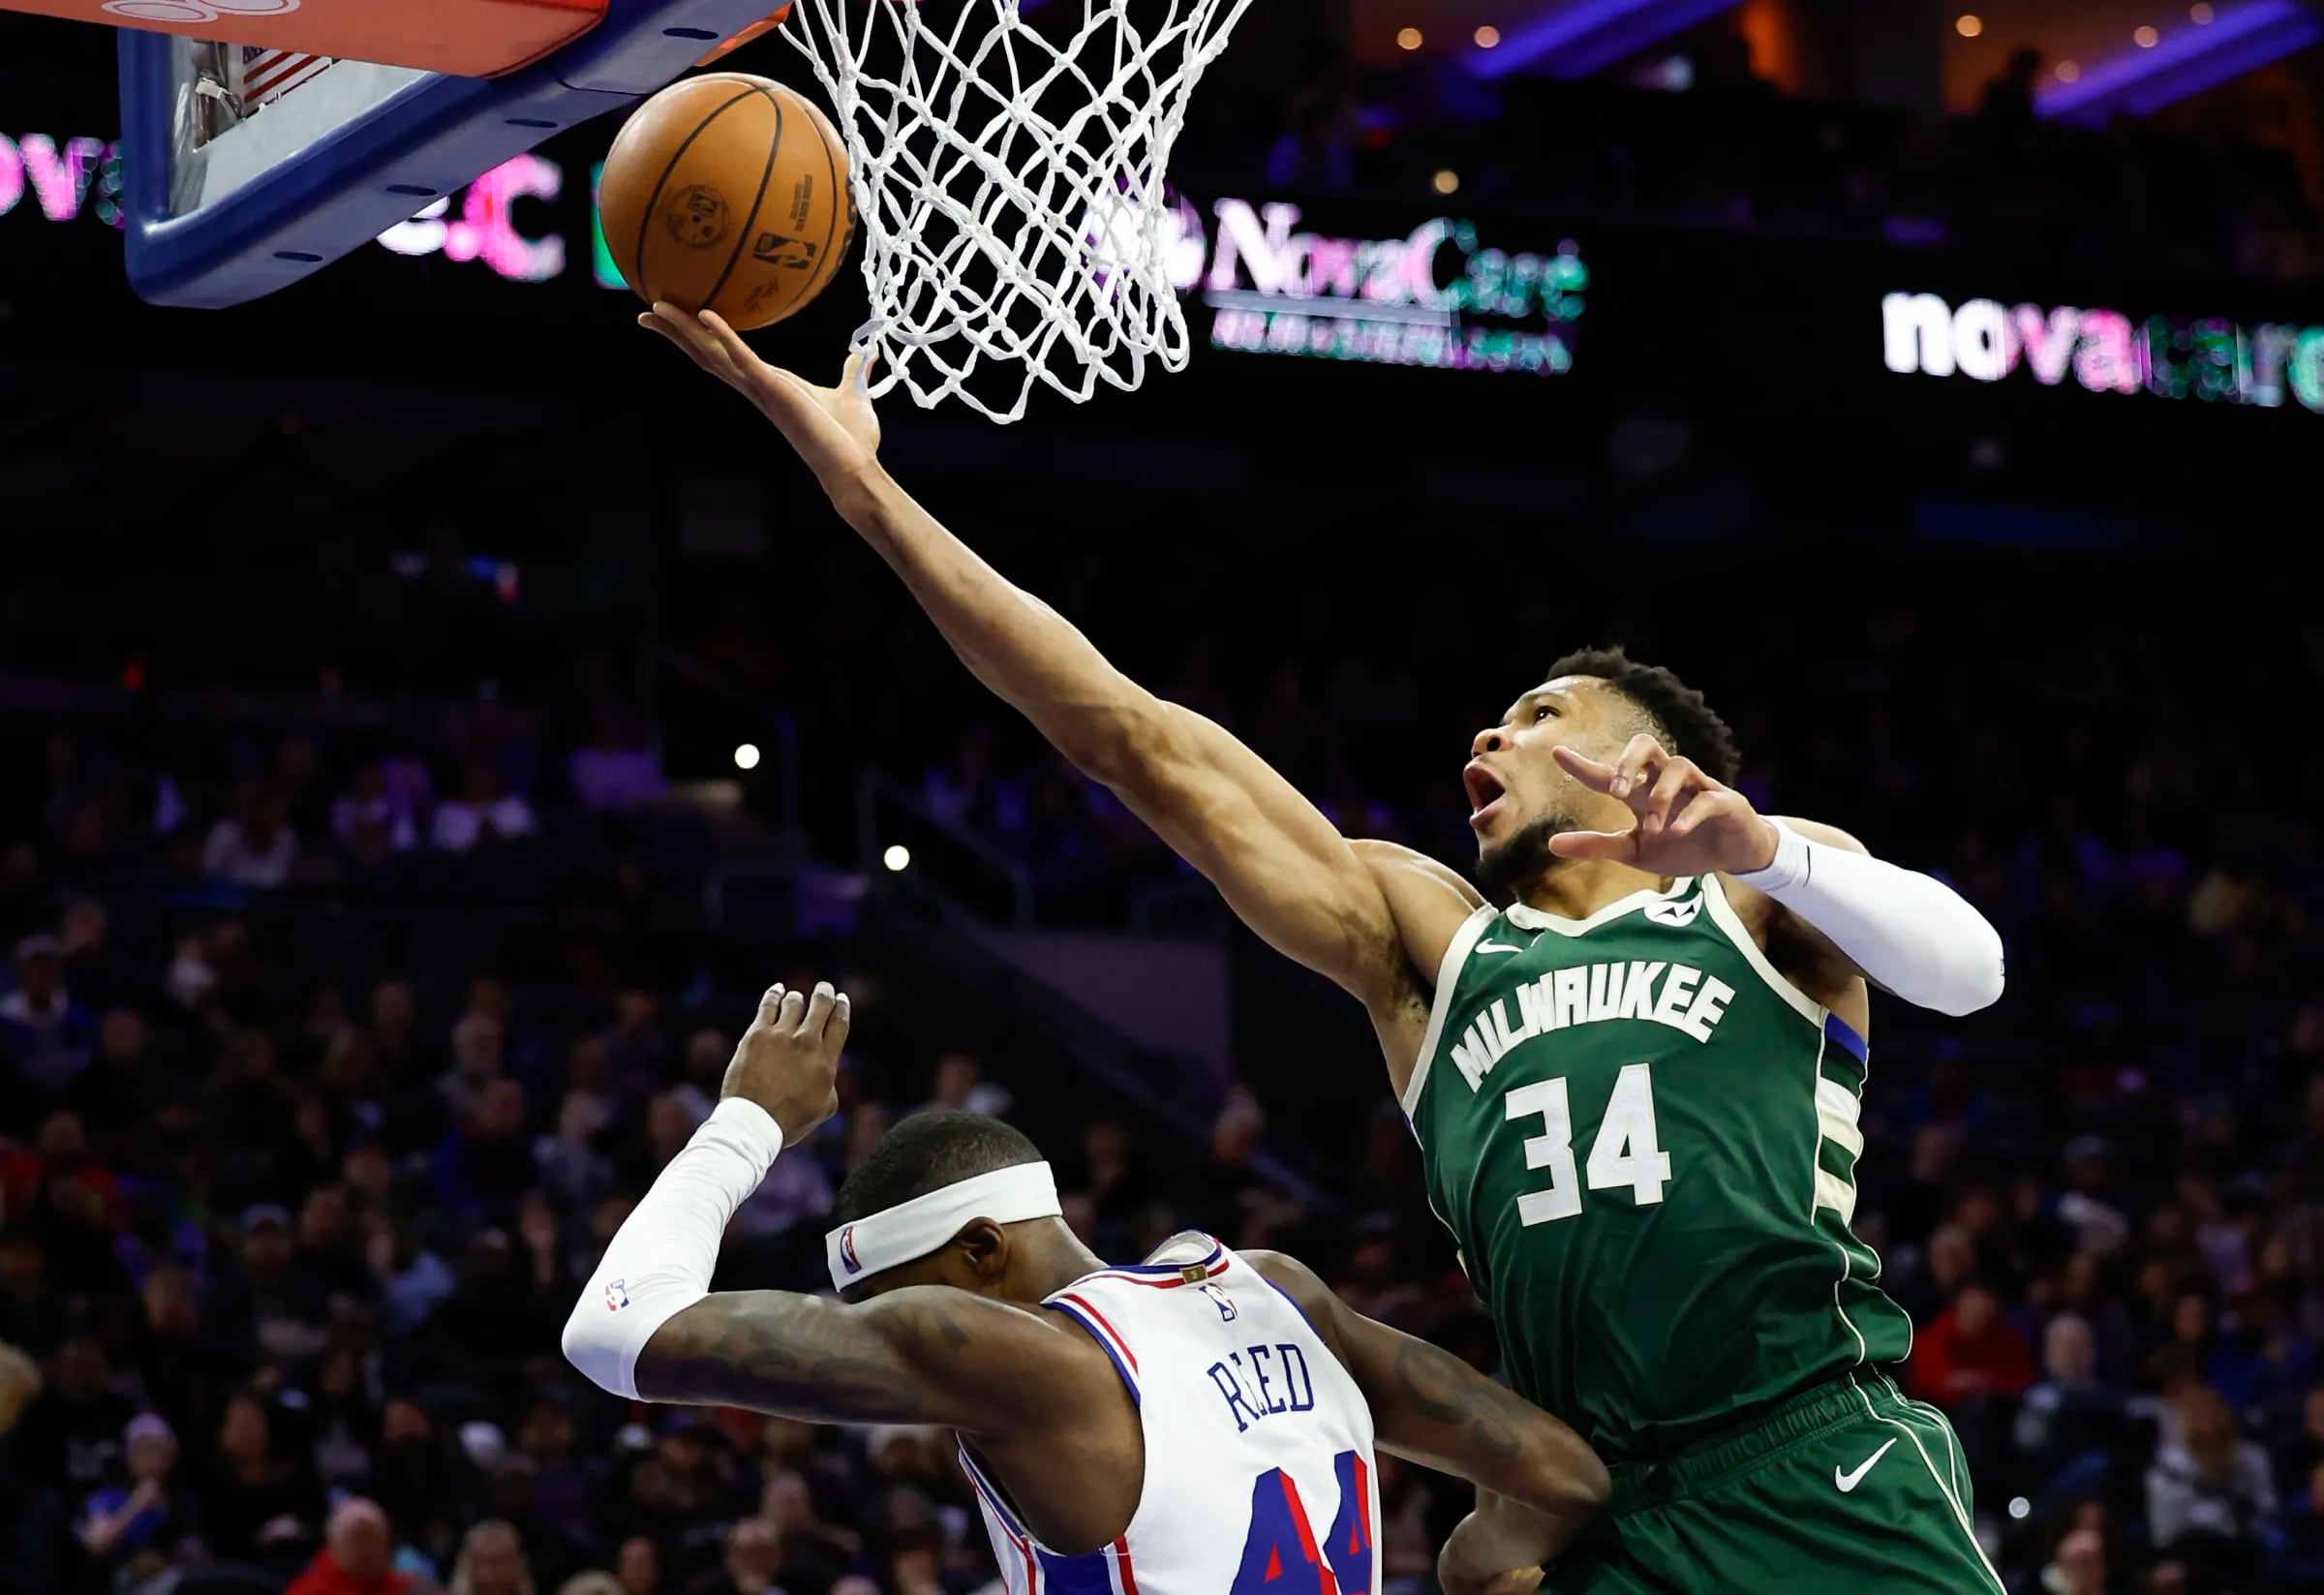 The Sixers could end up facing Giannis Antetokounmpo and the Milwaukee Bucks in the first round of the NBA playoffs. 